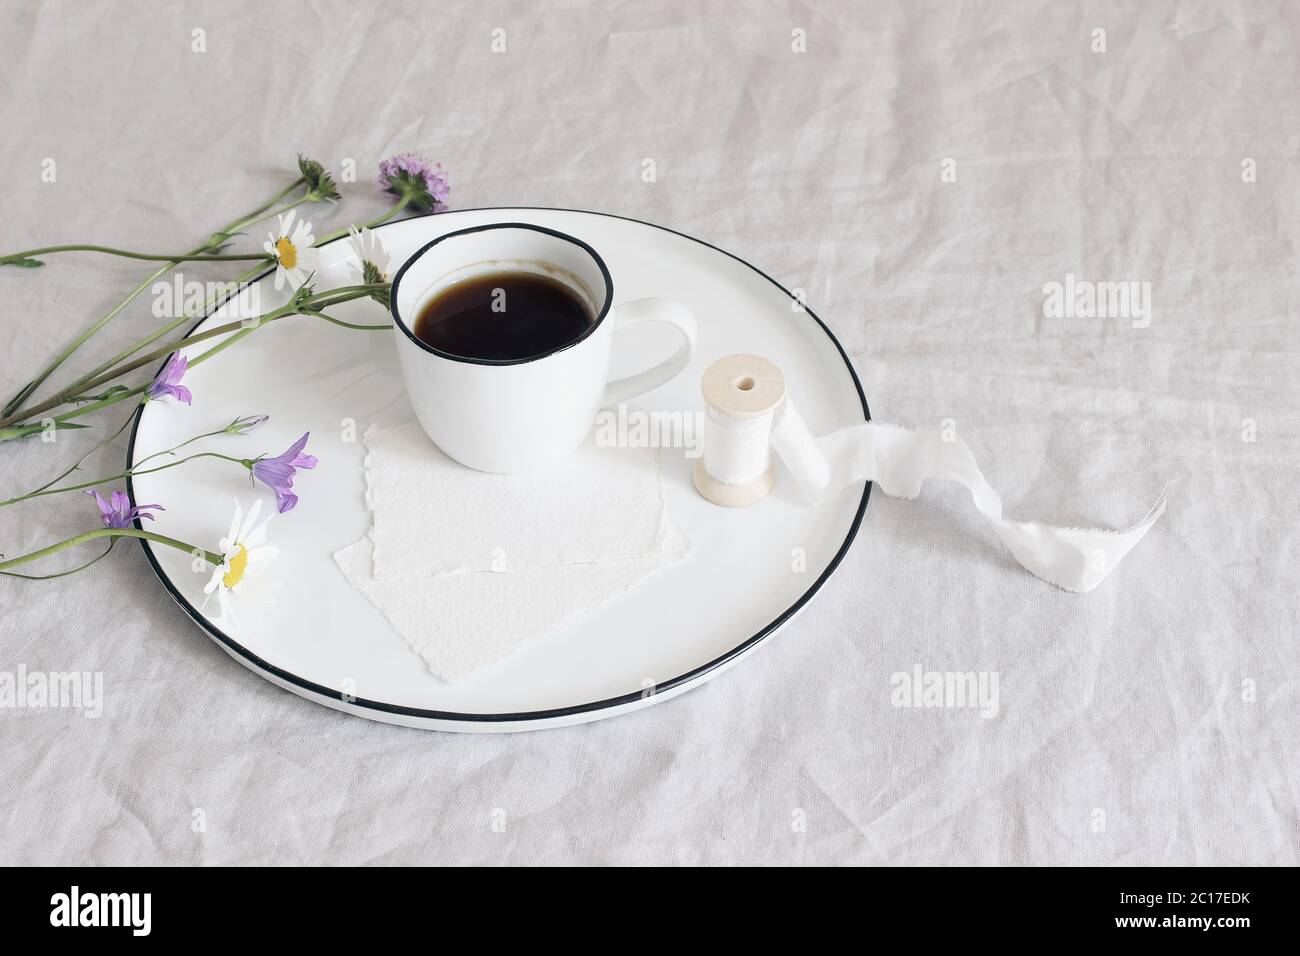 Spring, summer still life scene. Blank cotton paper greeting cards mockups on ceramic plate. Cup of coffee, silk ribbon, daisies and bluebells flowers Stock Photo